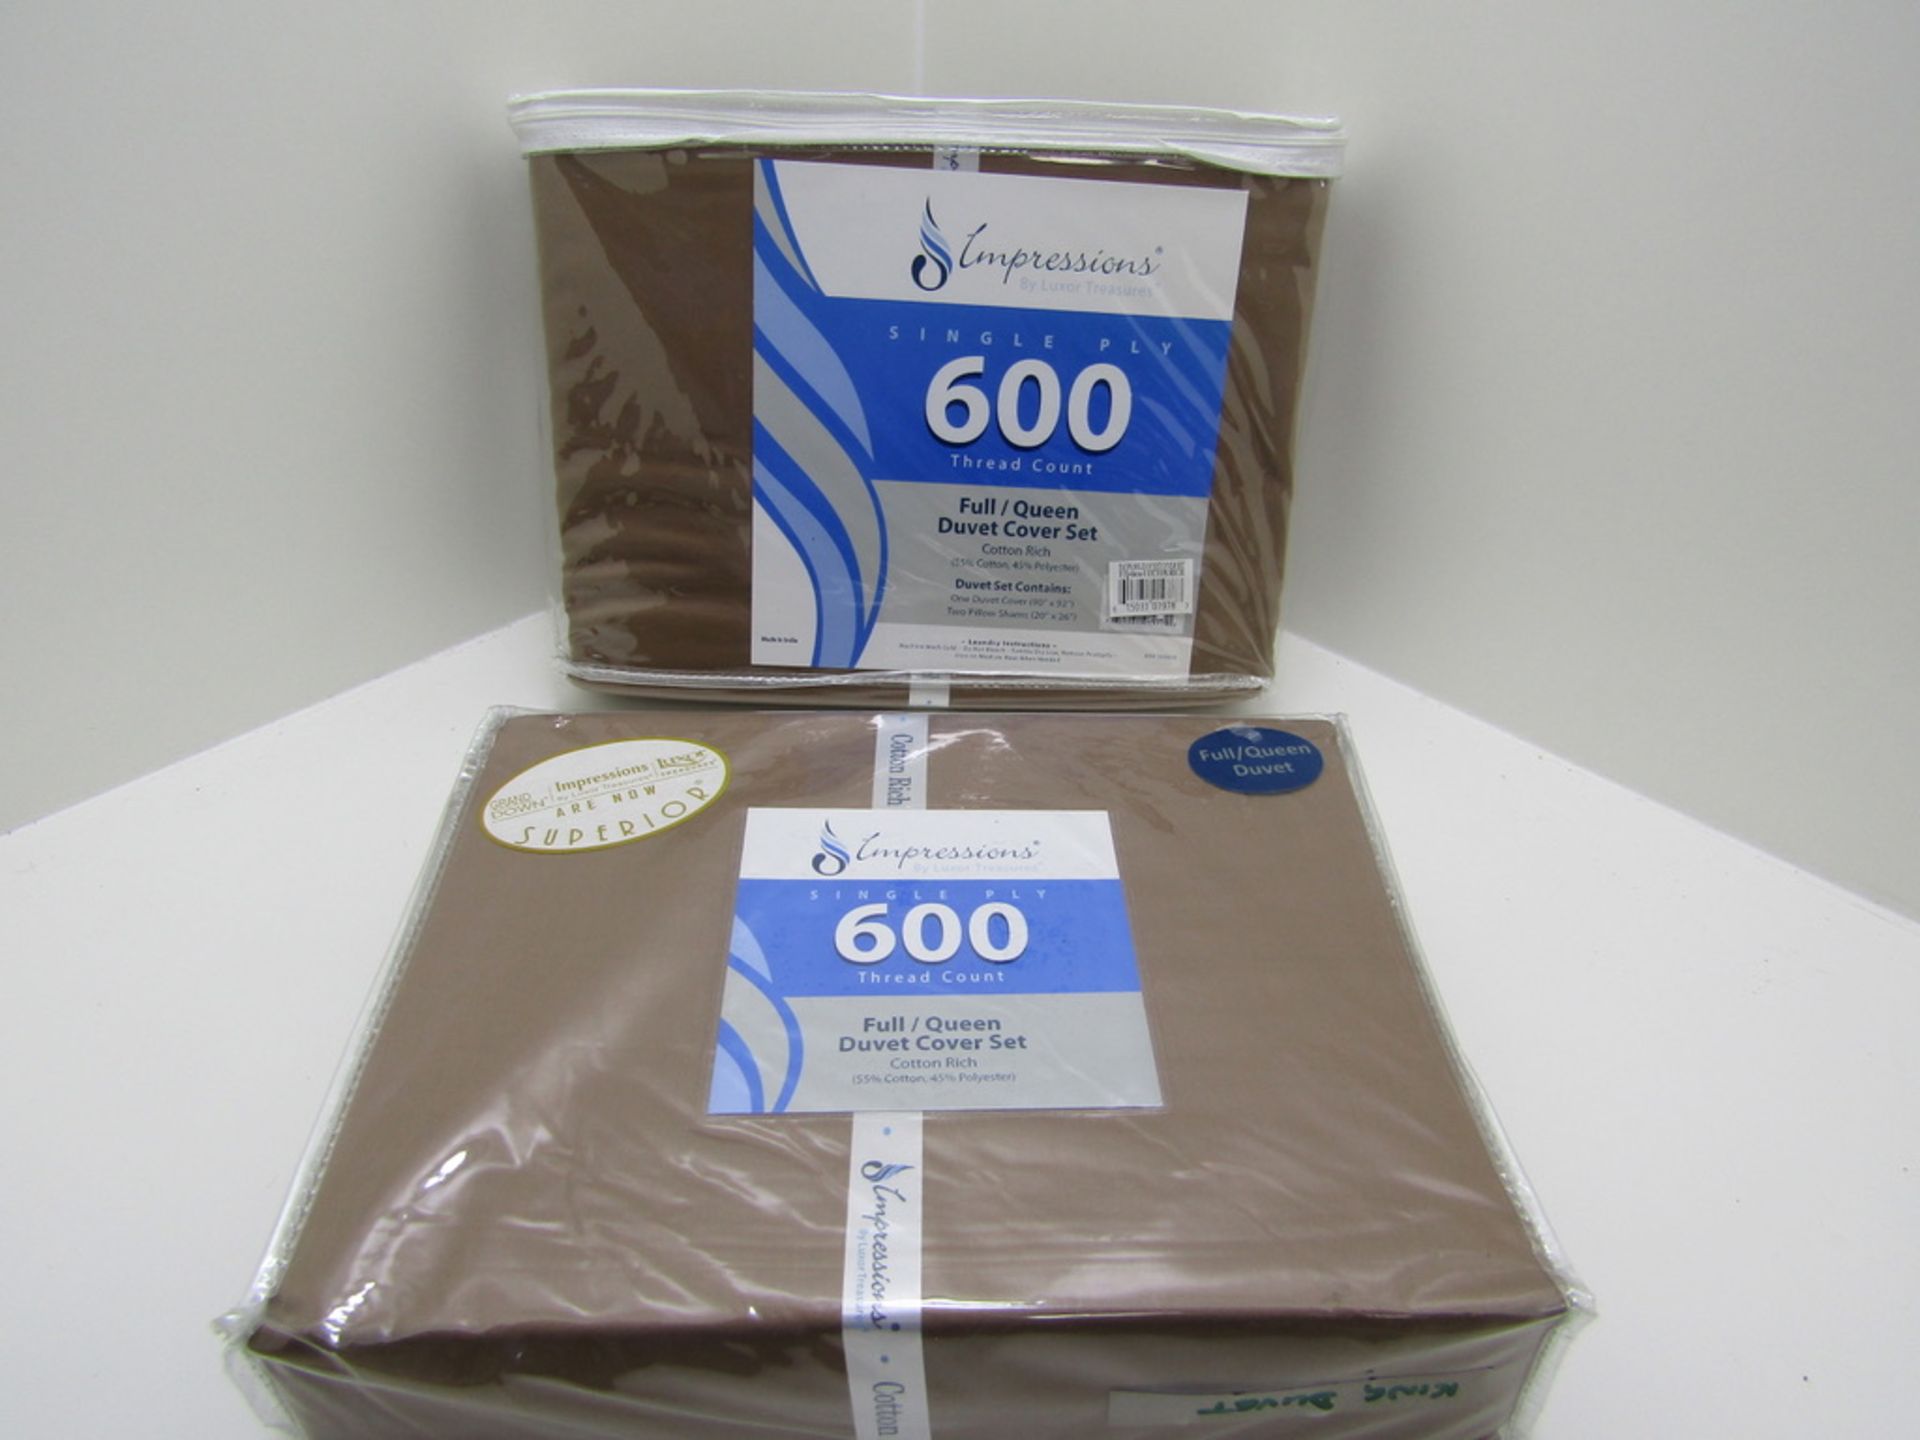 2 x Duvet Cover Sets. King size. Taupe solid.